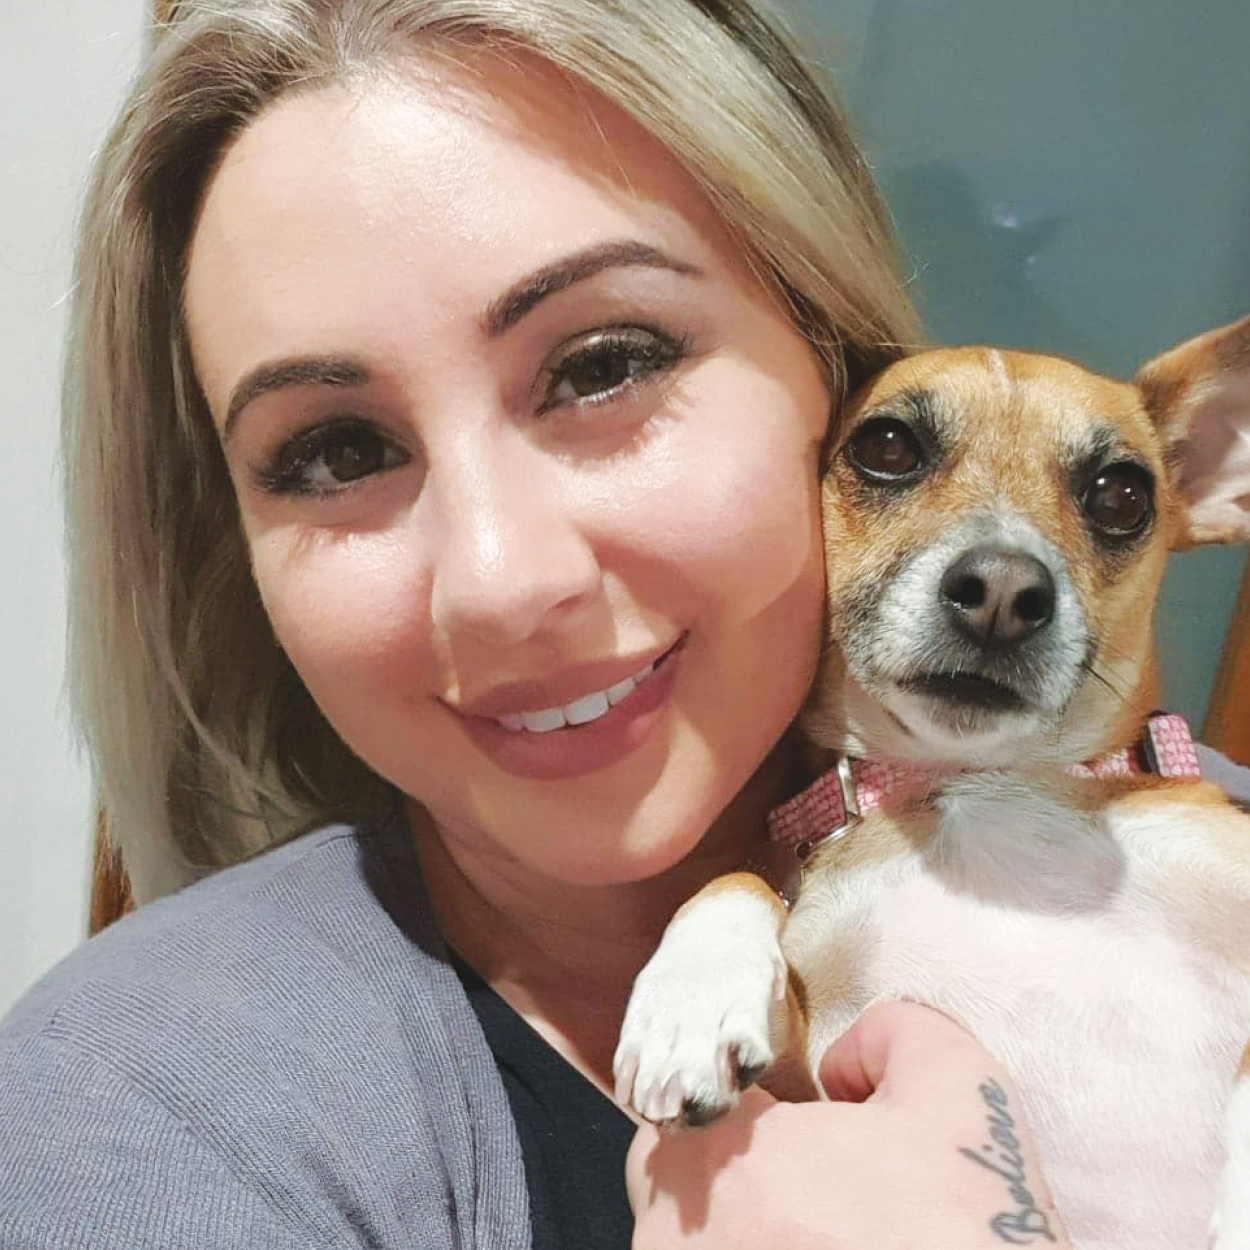 Liz gets more time with her adorable pup thanks to #LifewithNutrimetics